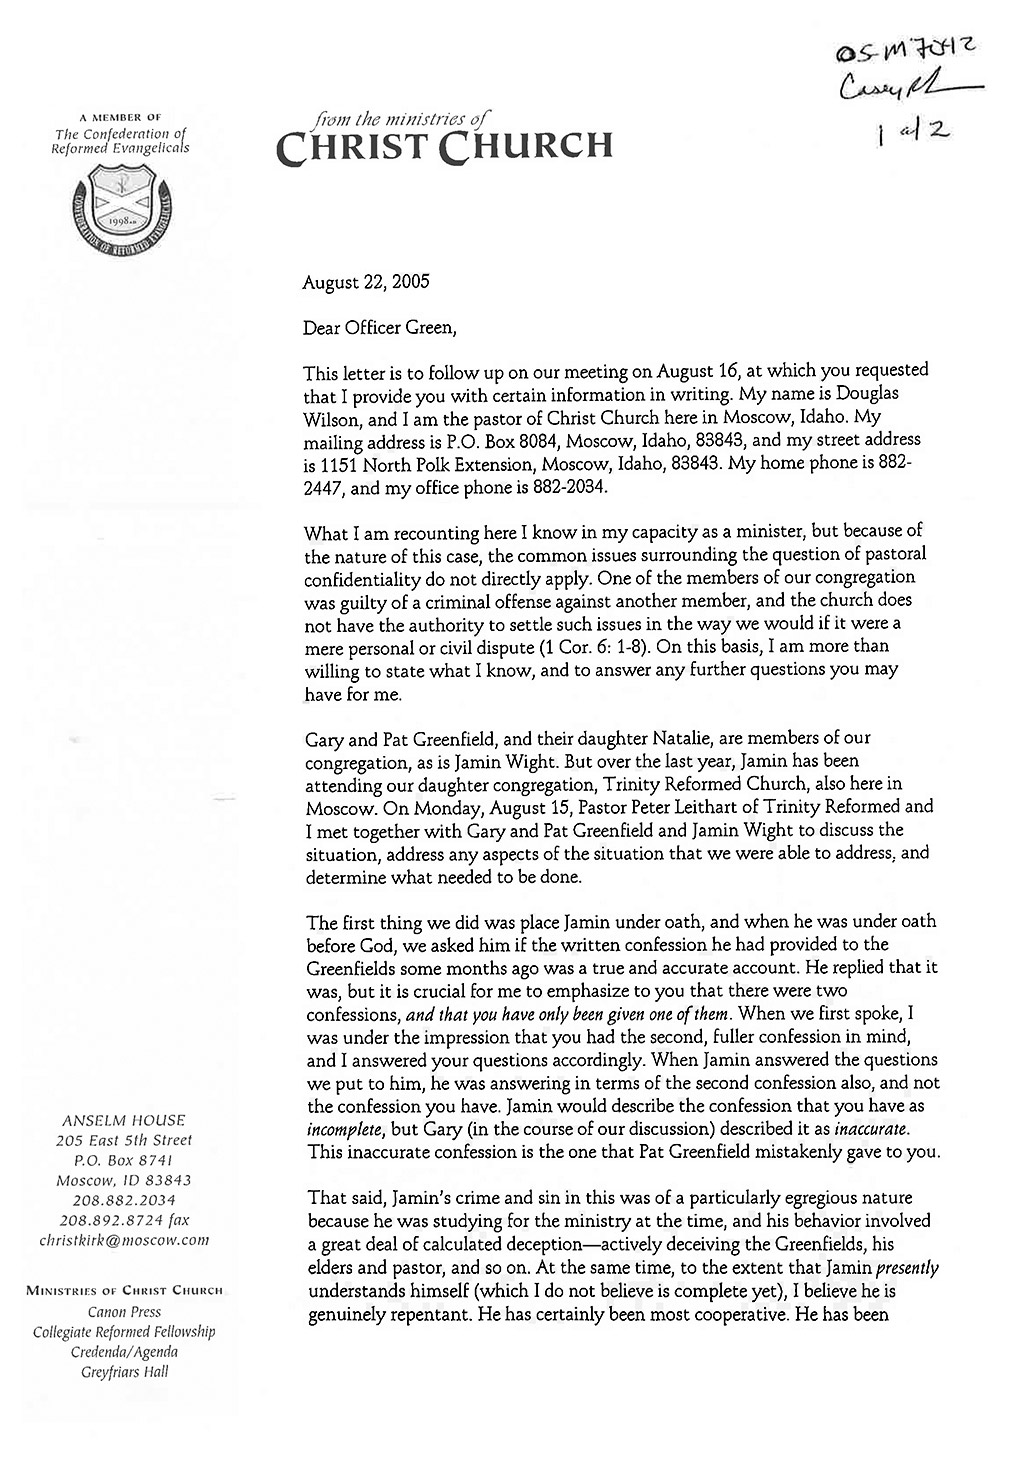 Douglas Wilson to Officer Green page 1